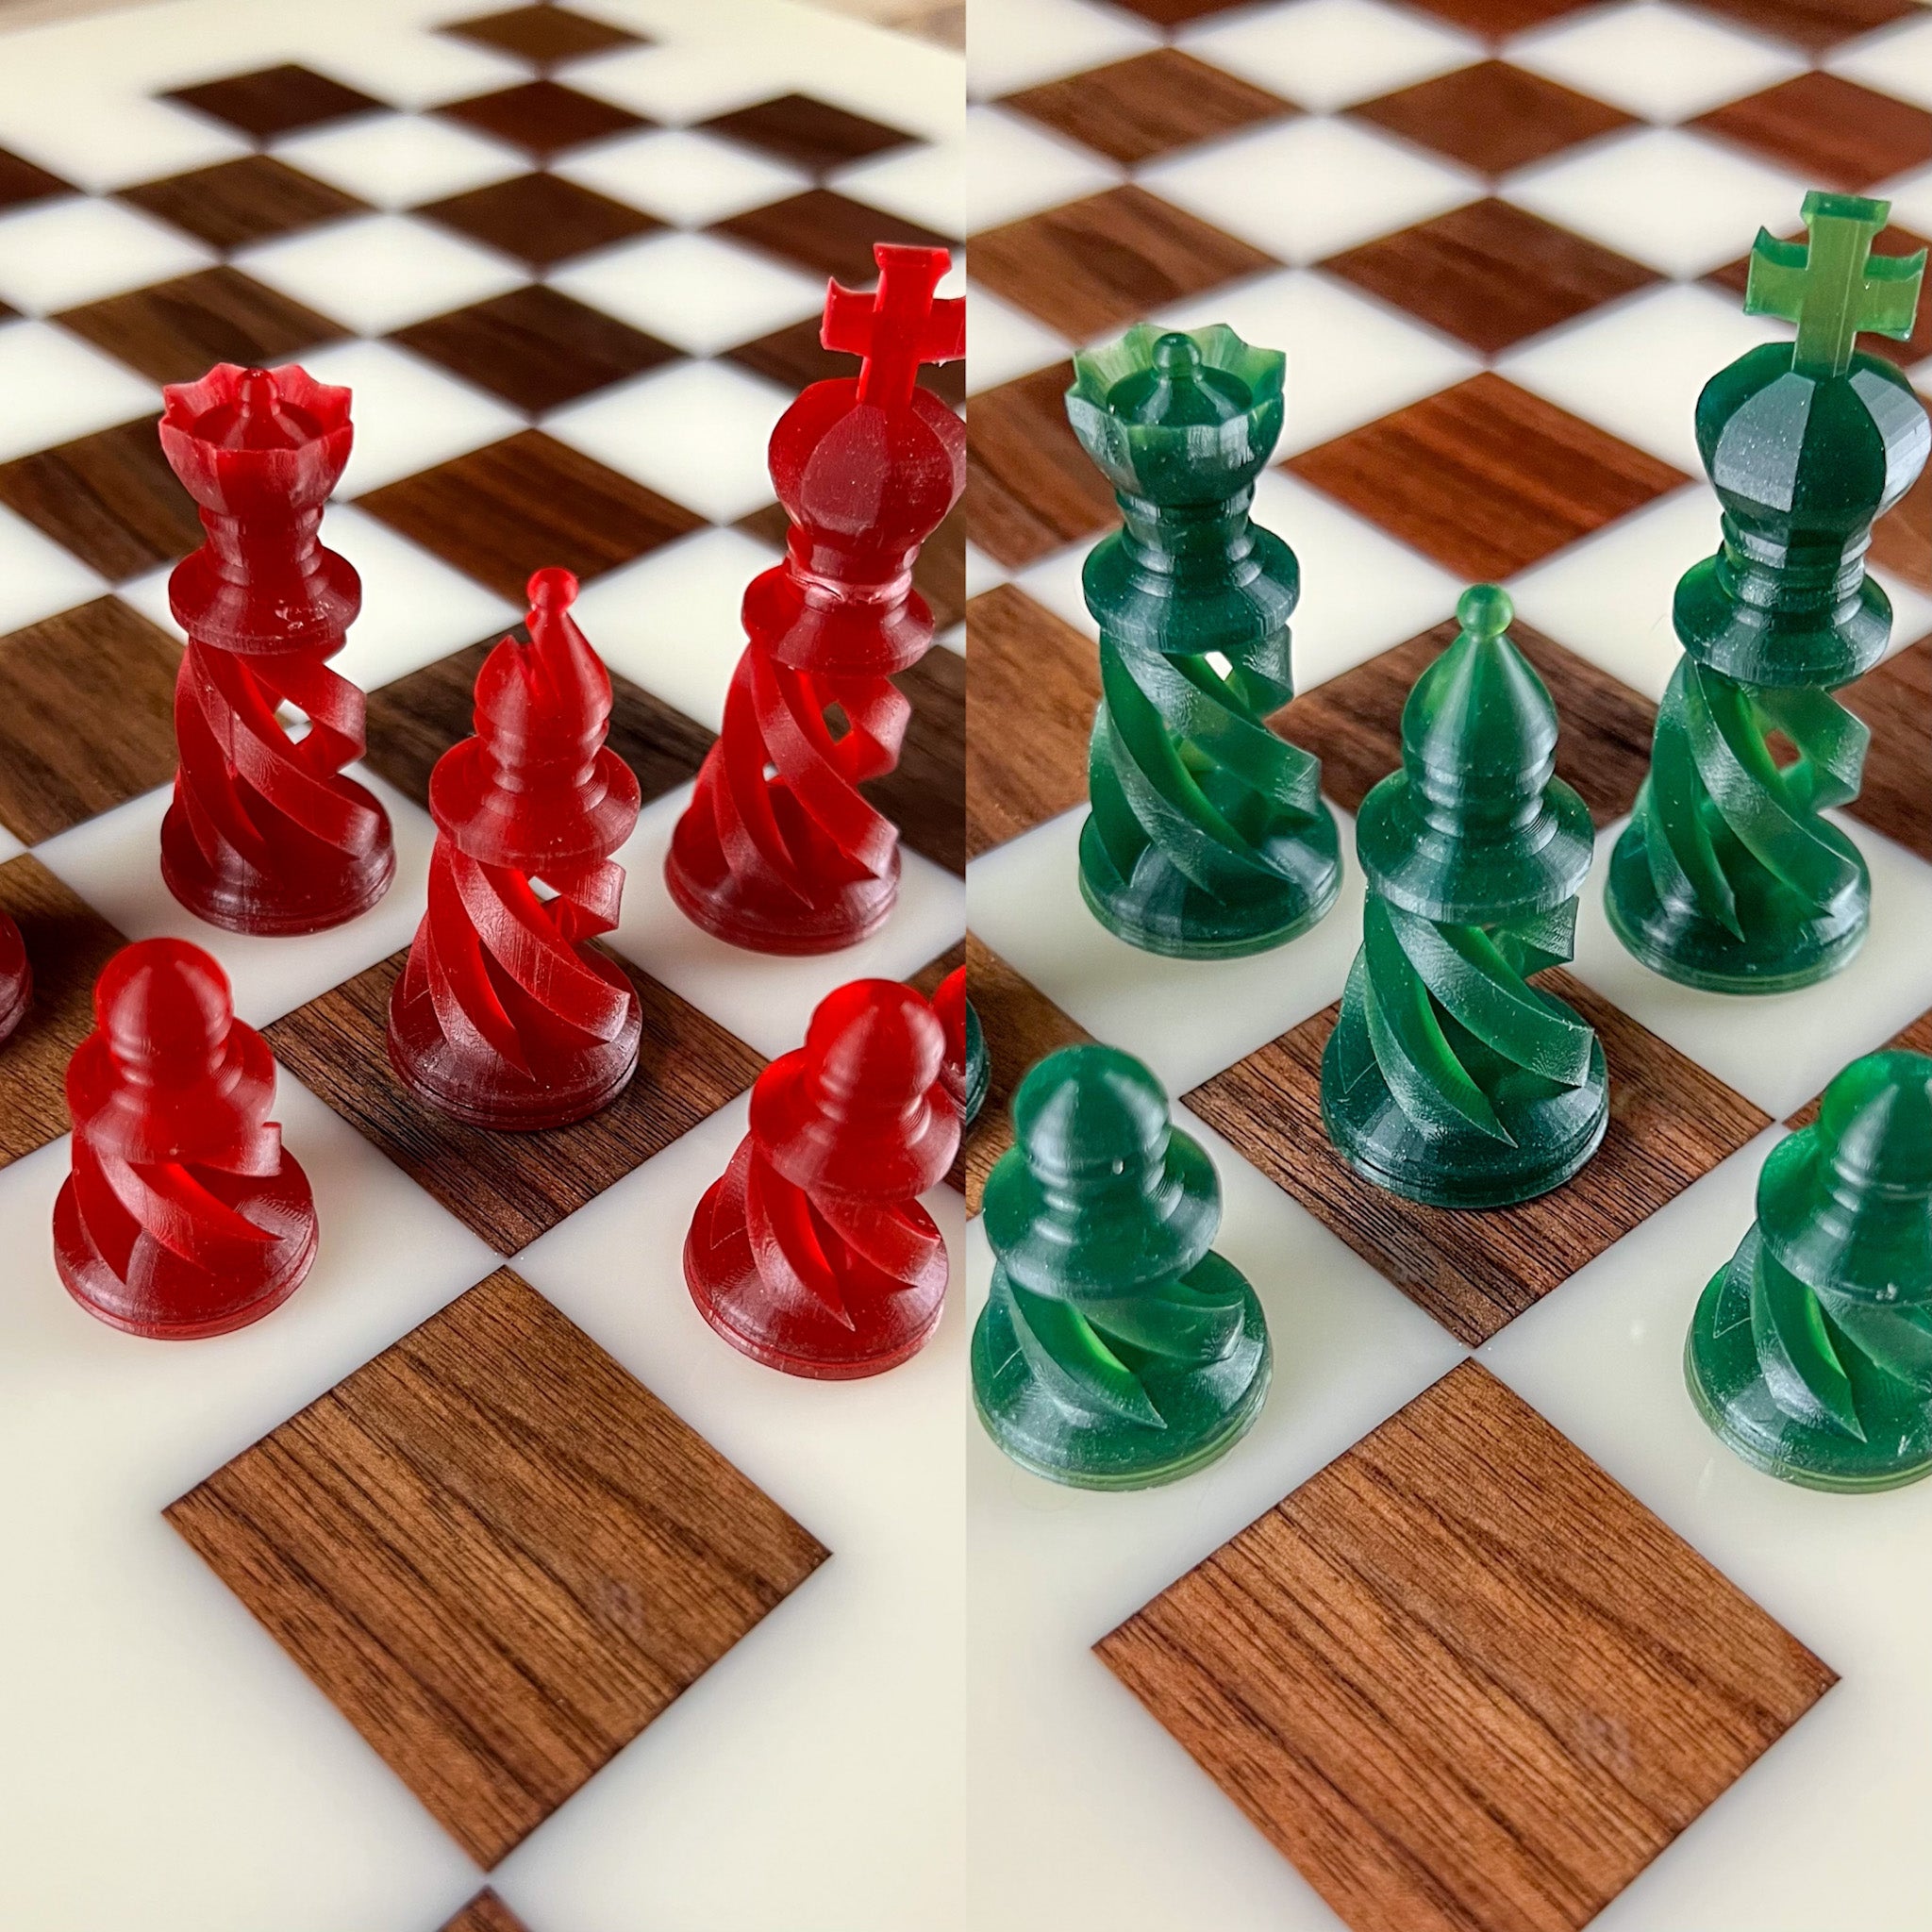 PRE-ORDER Chess Pieces (Full Set)